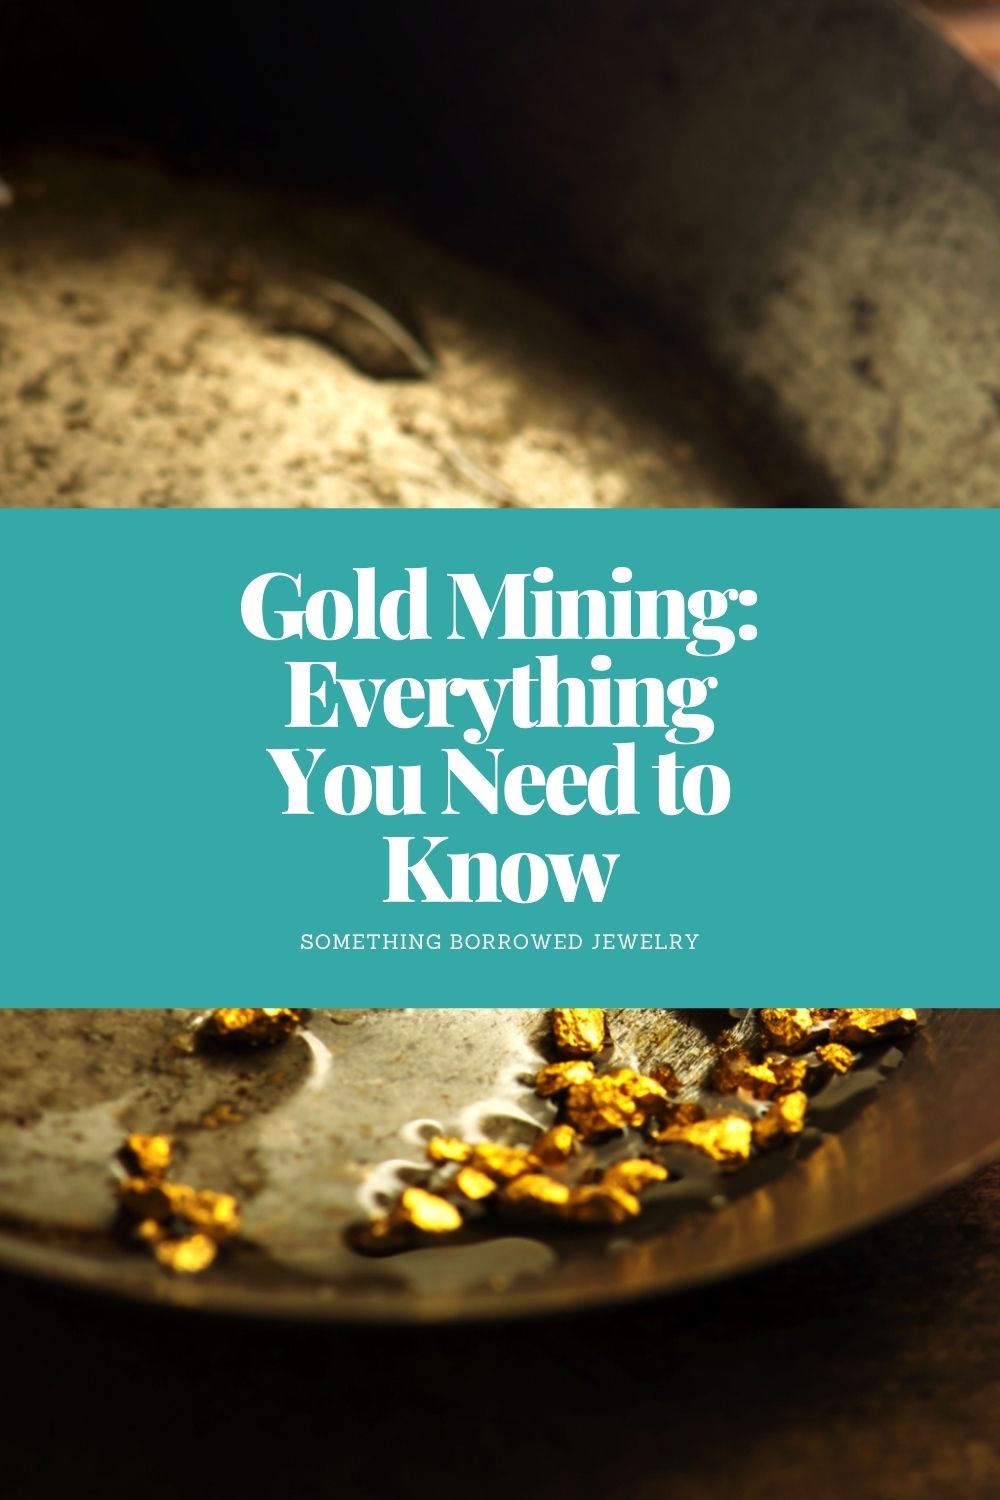 Gold Mining Everything You Need to Know pin 2